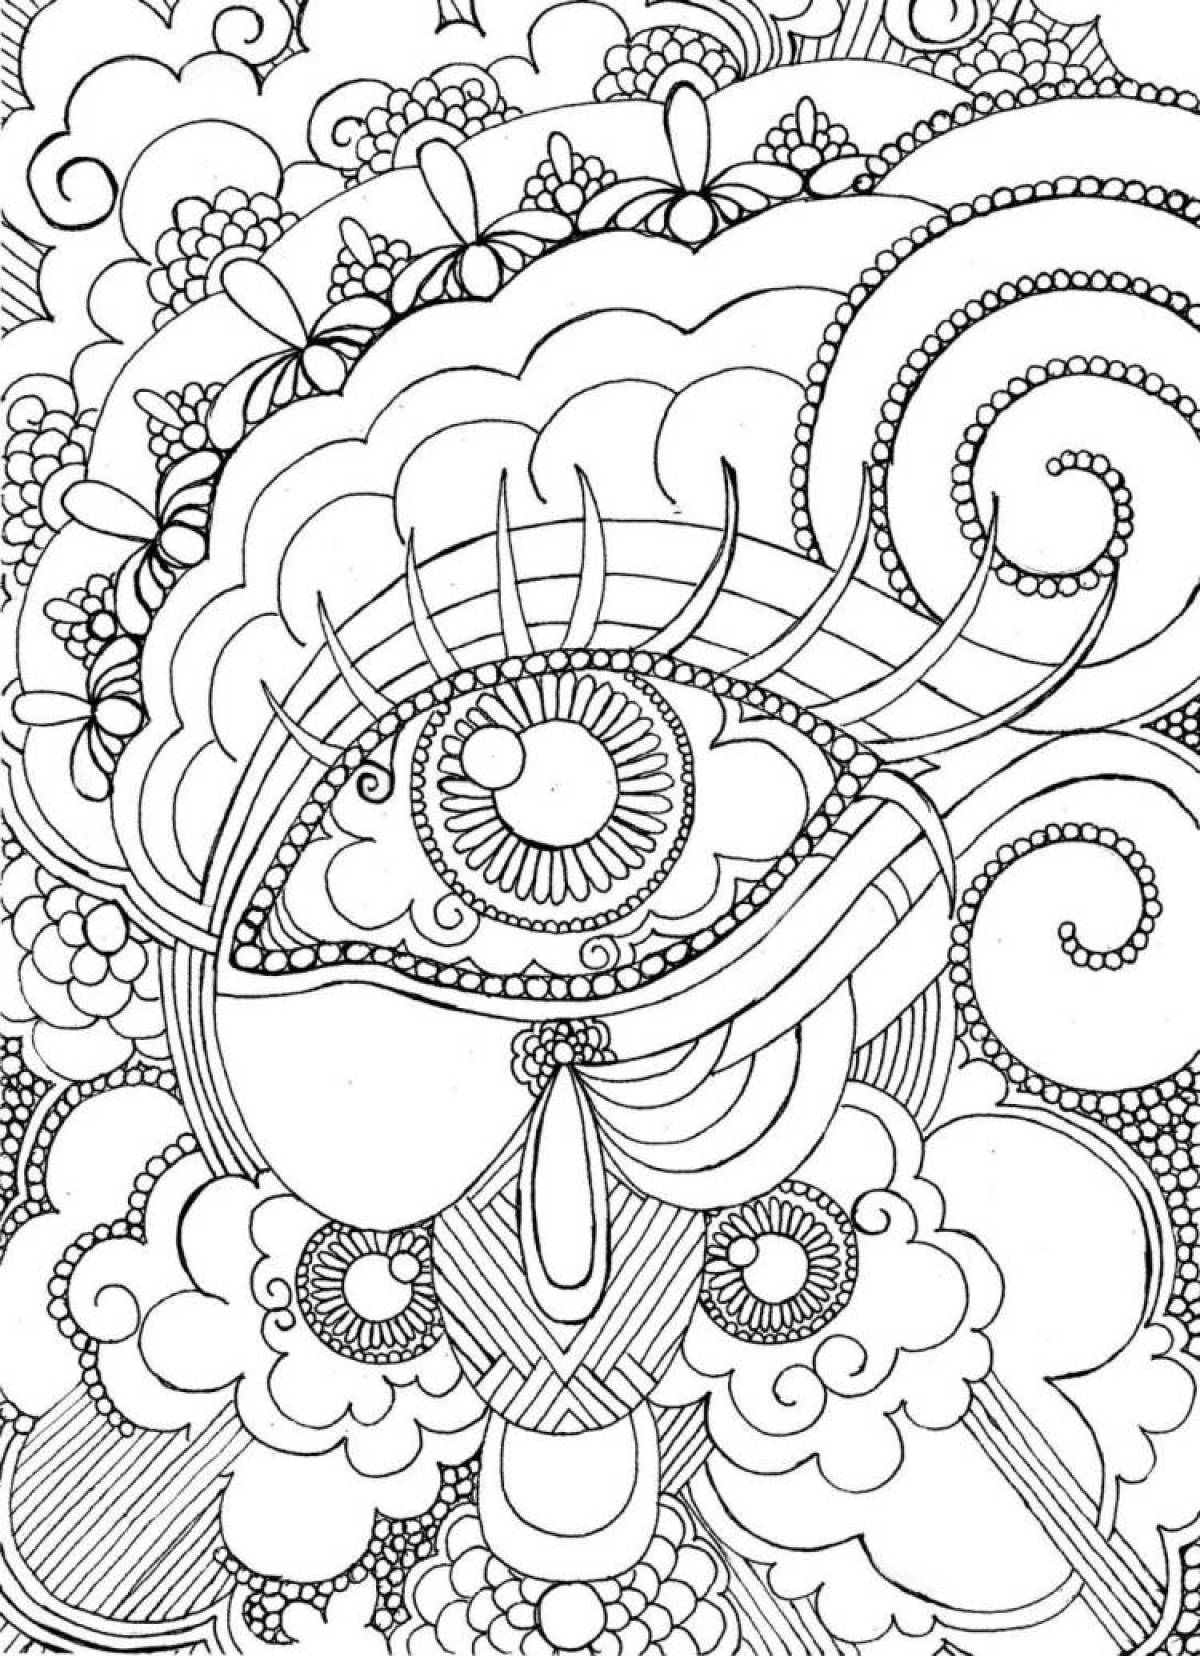 Great coloring book